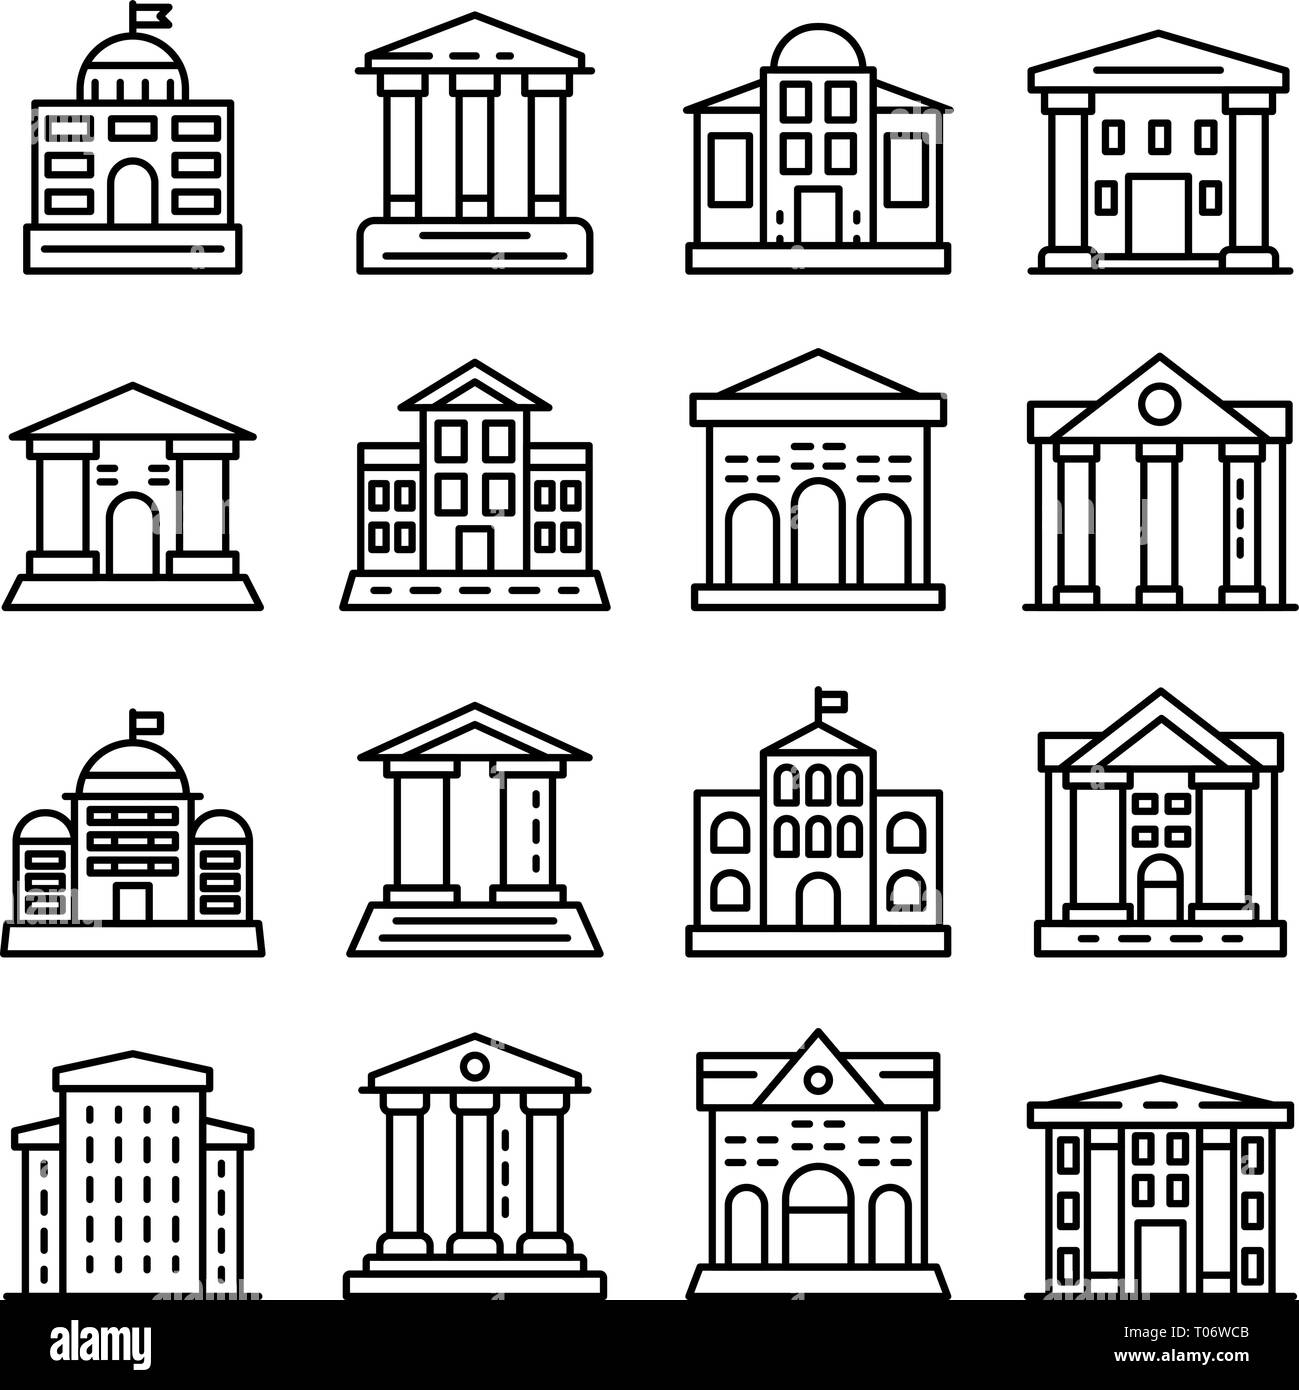 Courthouse icons set, outline style Stock Vector